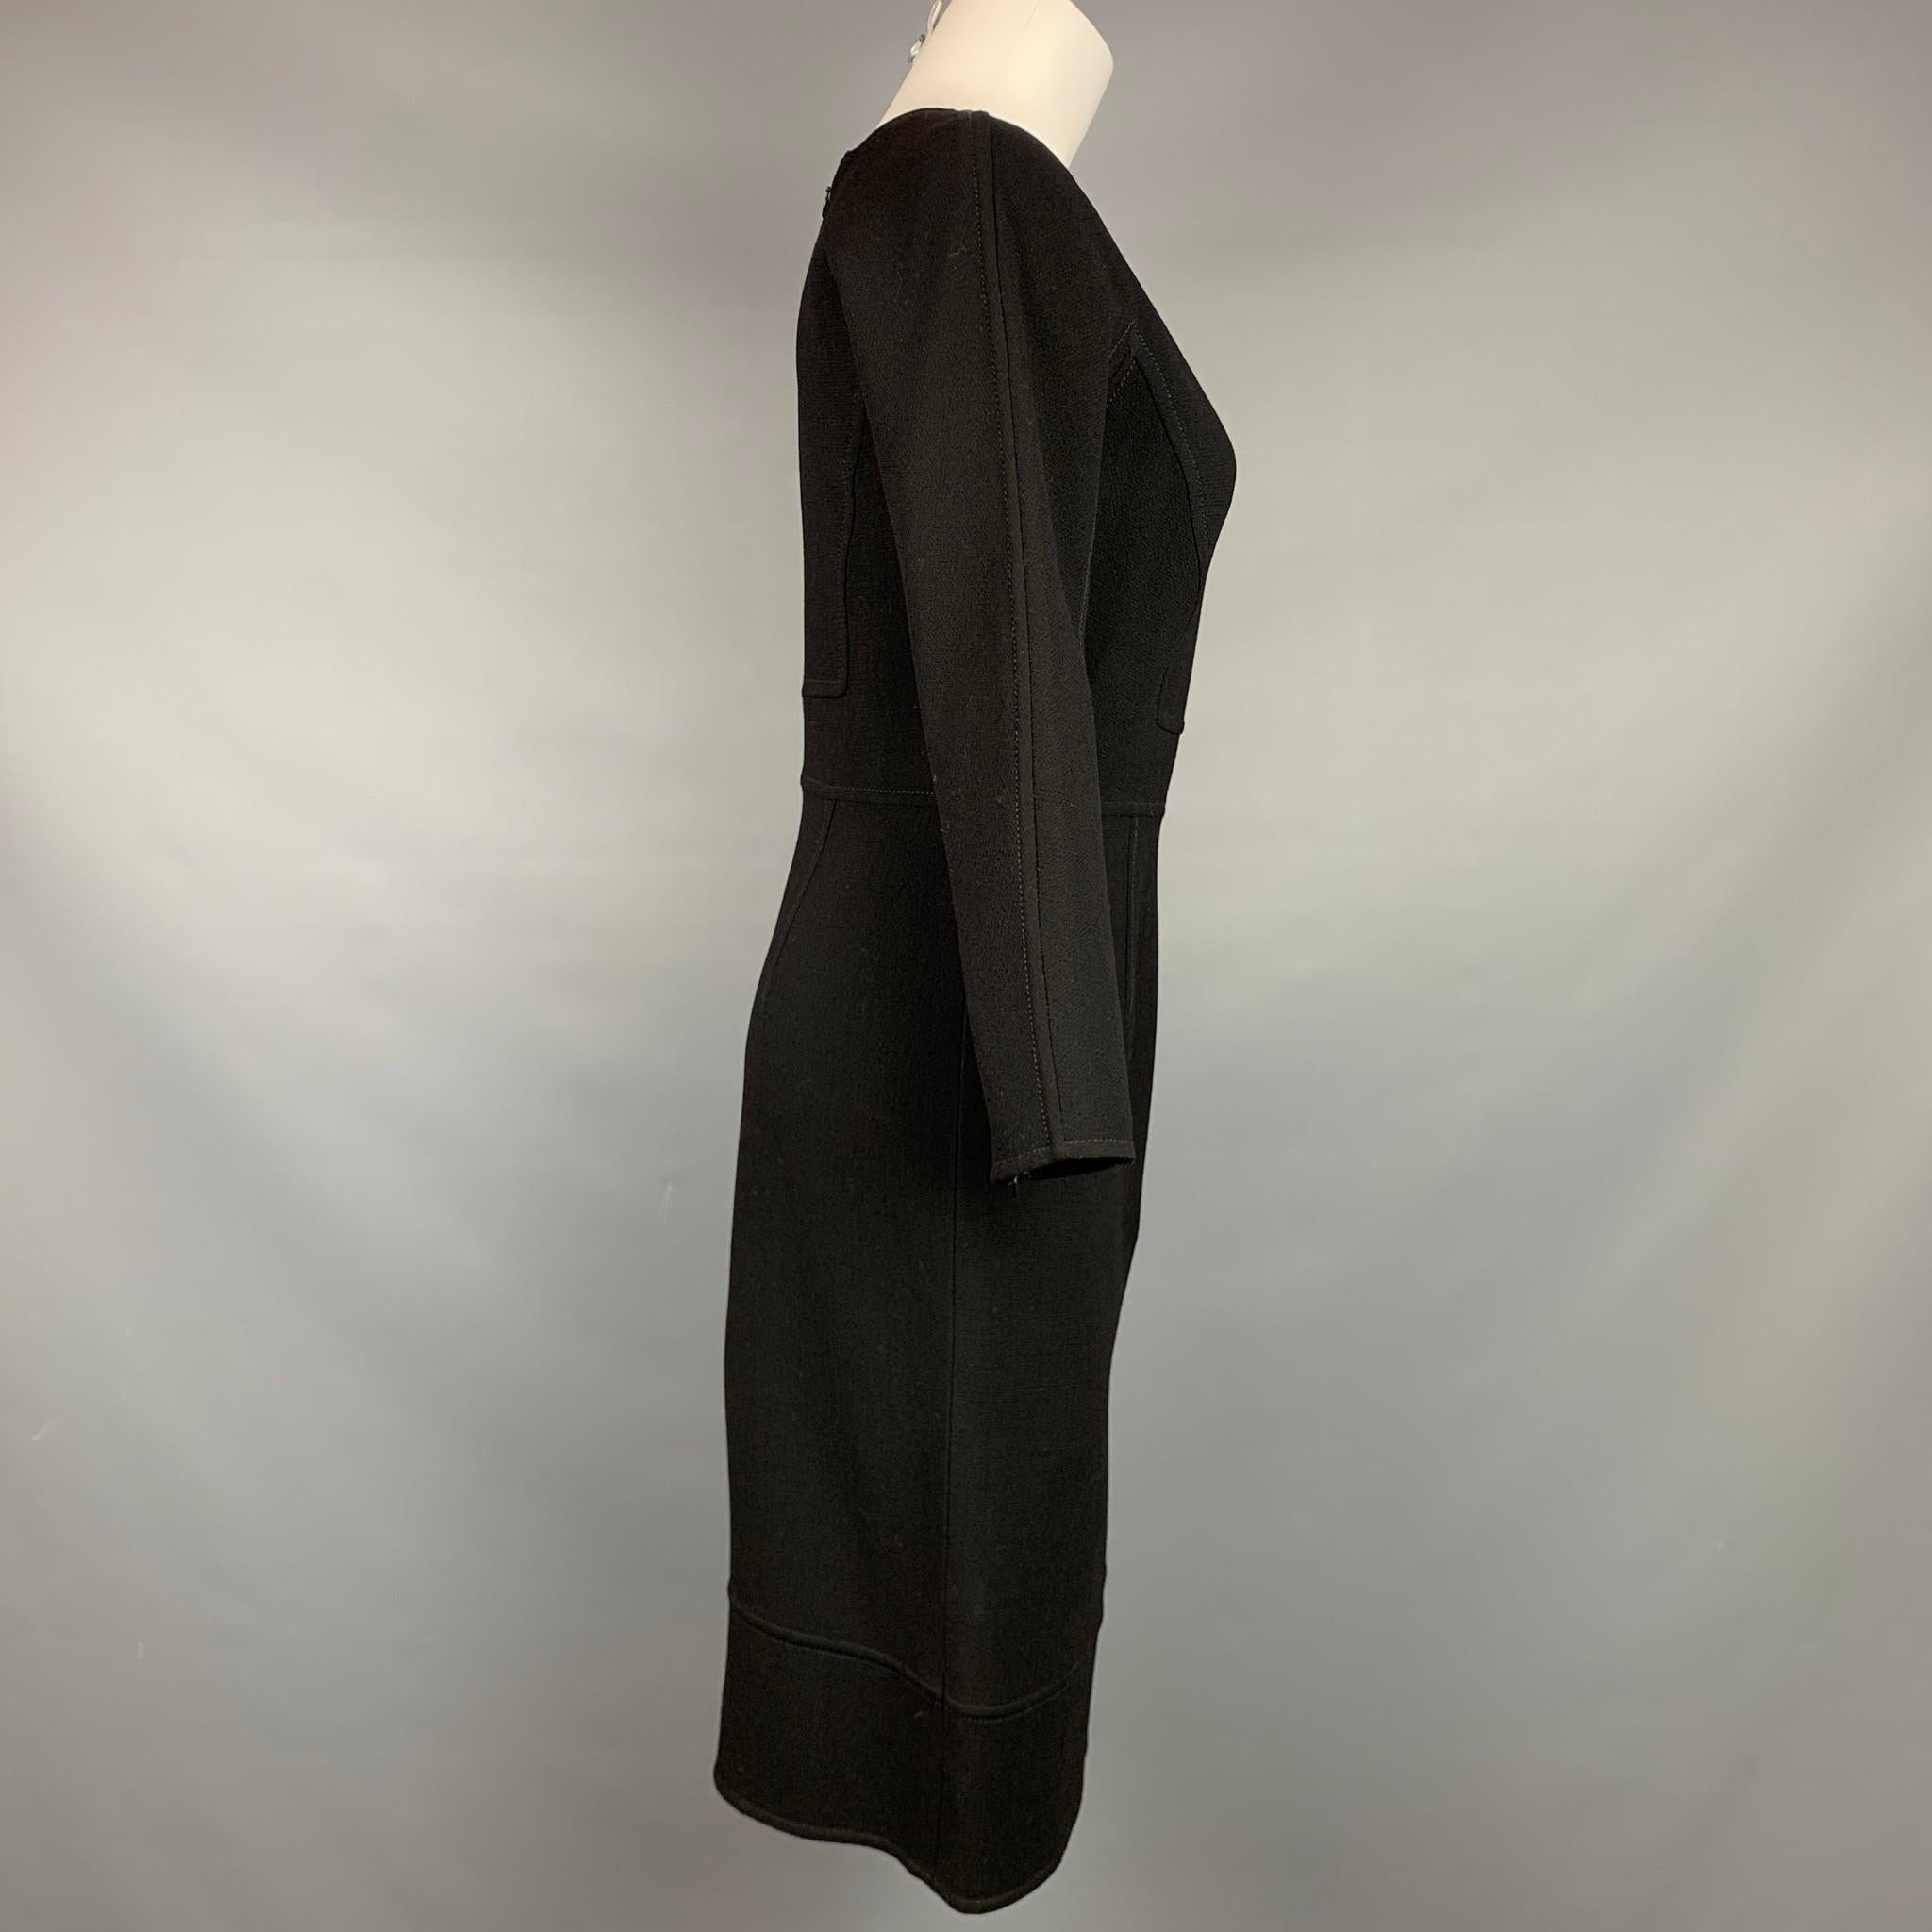 OSCAR DE LA RENTA dress comes in a black crepe wool featuring a fitted style, a-line, top stitching, and a back zip up closure. Made in Italy.

Very Good Pre-Owned Condition.
Marked: 4

Measurements:

Shoulder: 17 in.
Bust: 32 in.
Waist: 28 in.
Hip: